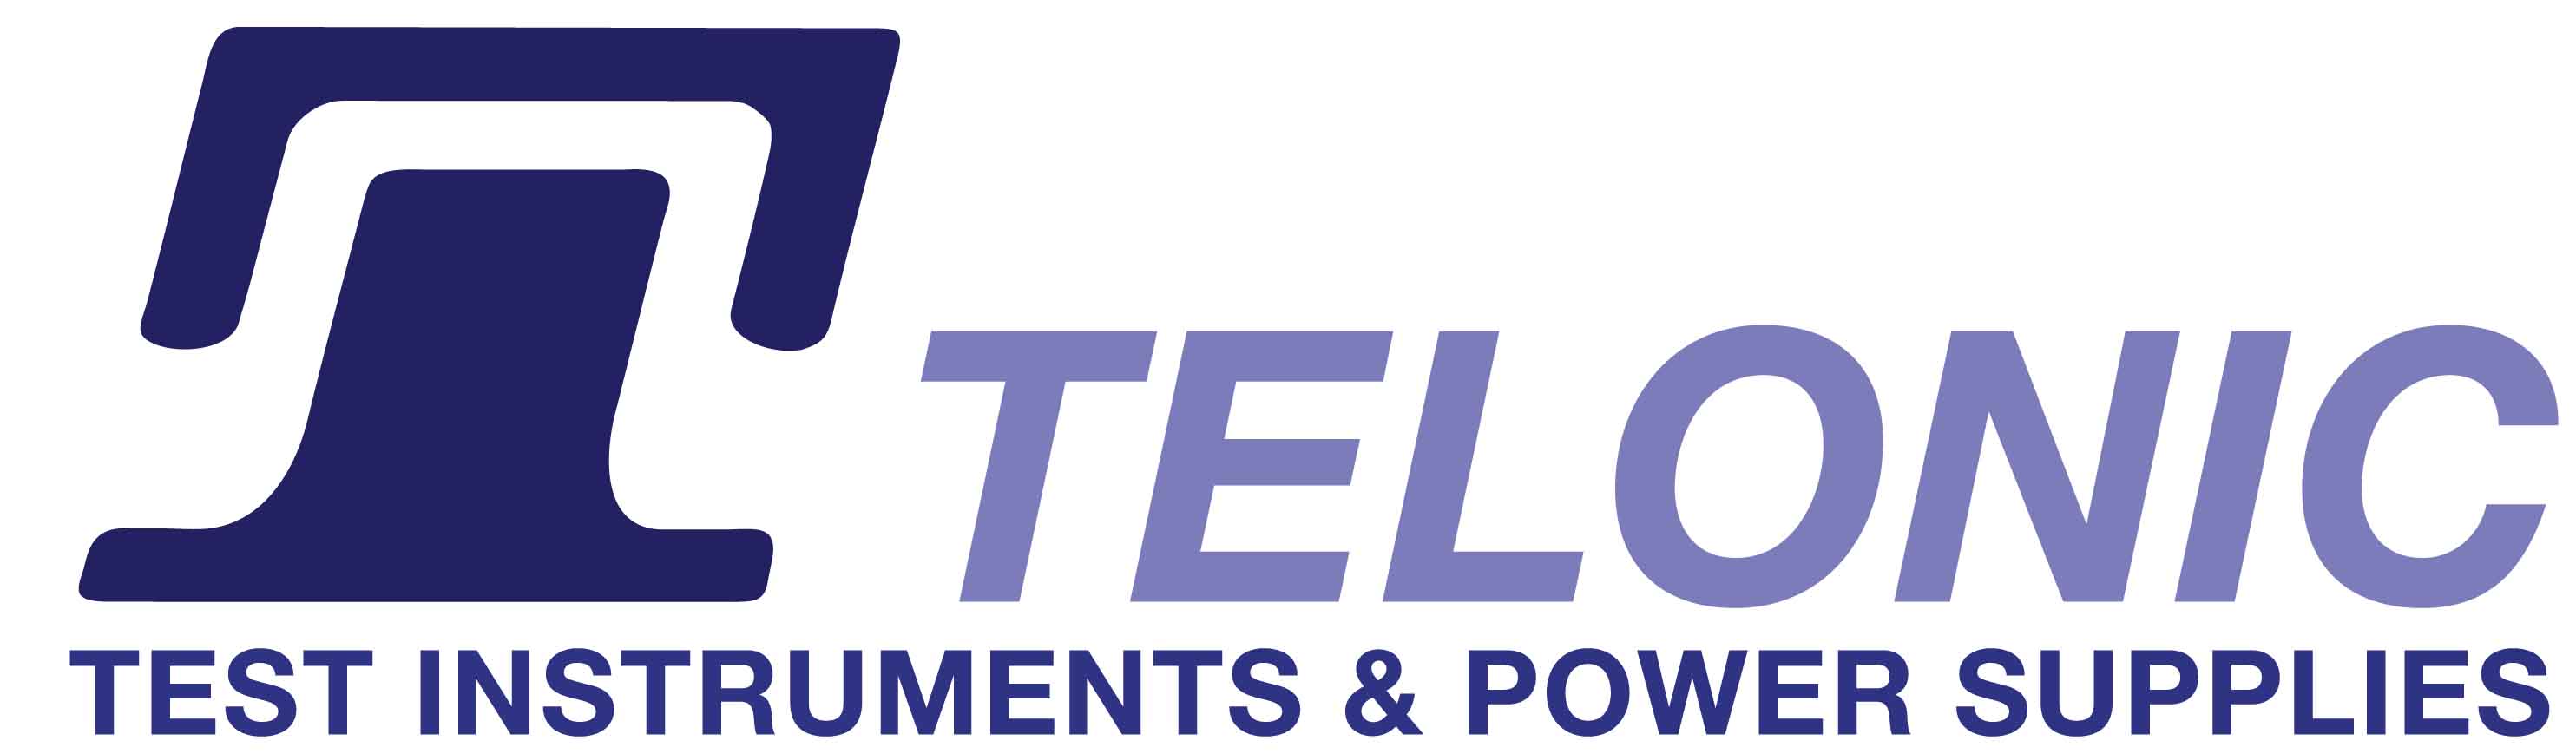 Kikusui AC DC Flash Test, Leakage Current testers and earth bond testing equipment available in the UK from electrical safety testing specialist telonic instruments